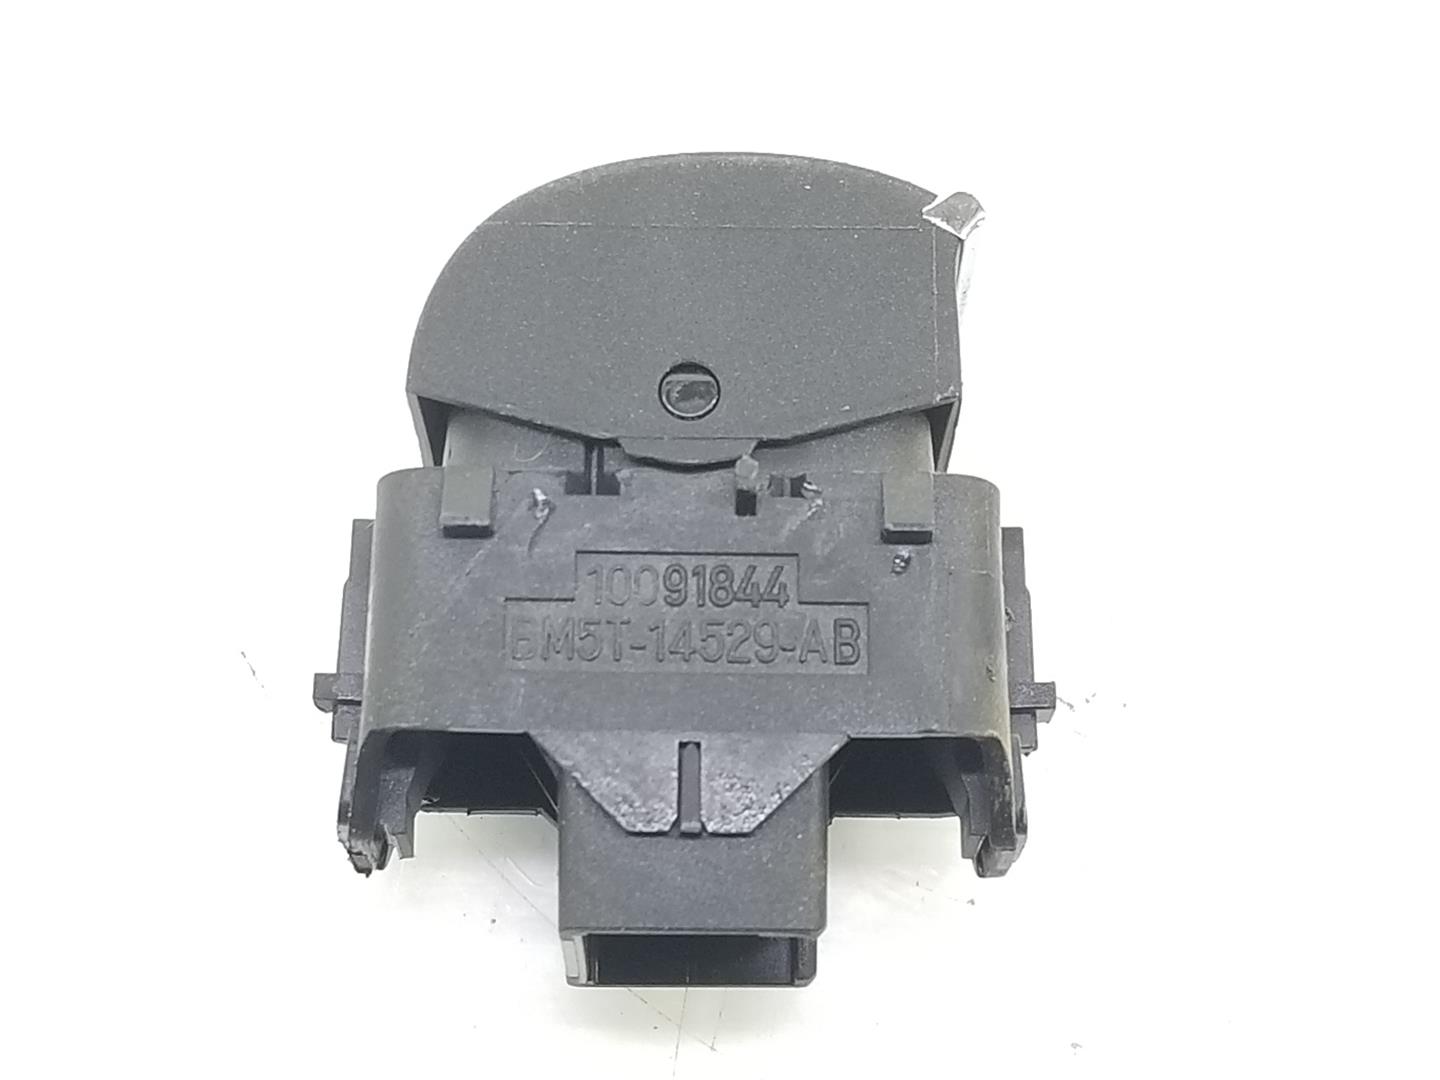 FORD Focus 3 generation (2011-2020) Front Right Door Window Switch BM5T14529AB, 1850432, 2222DL 19790836